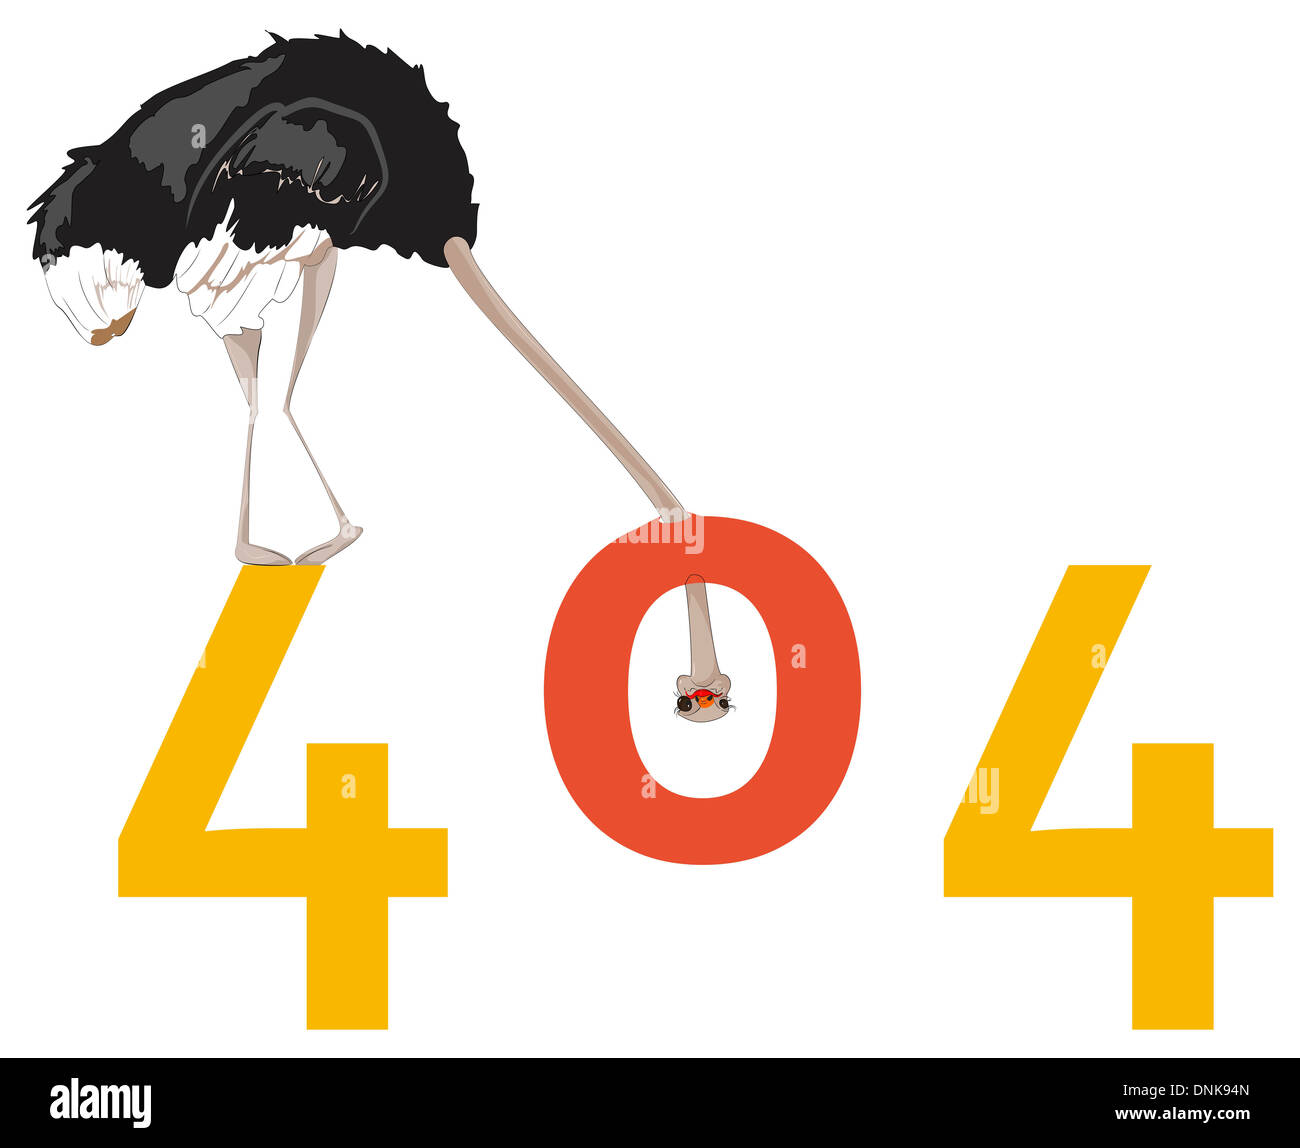 Illustrative representation of an ostrich view Stock Photo